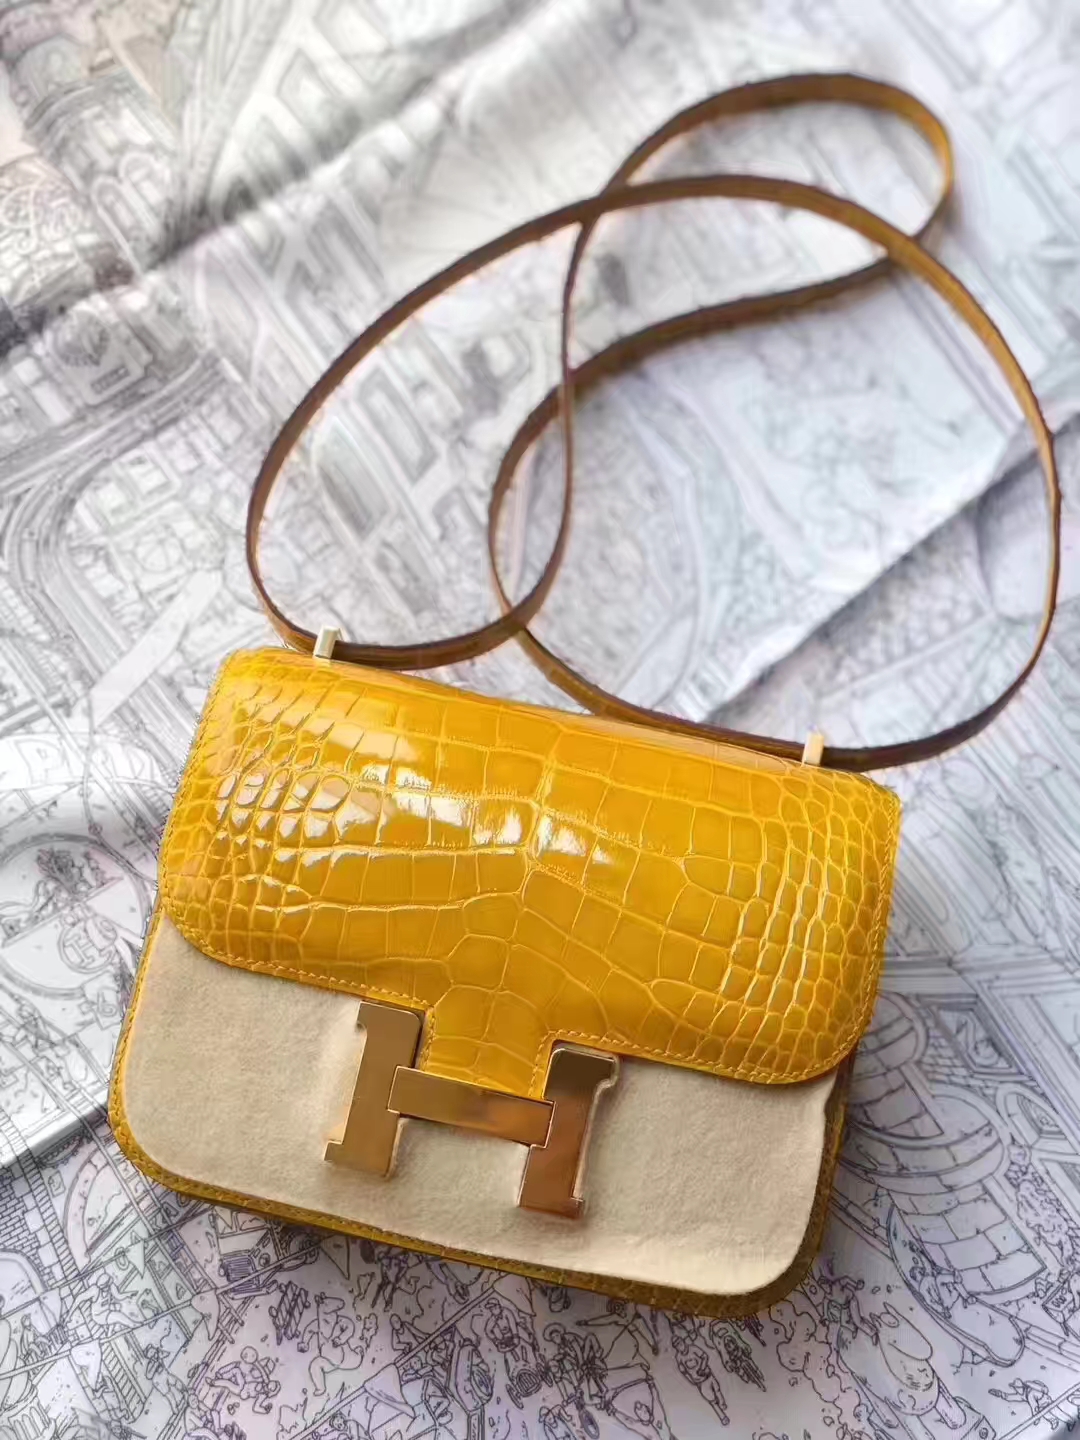 New Arrival Hermes 9D Amber Yellow Shiny Crocodile Leather Constance Bag18CM